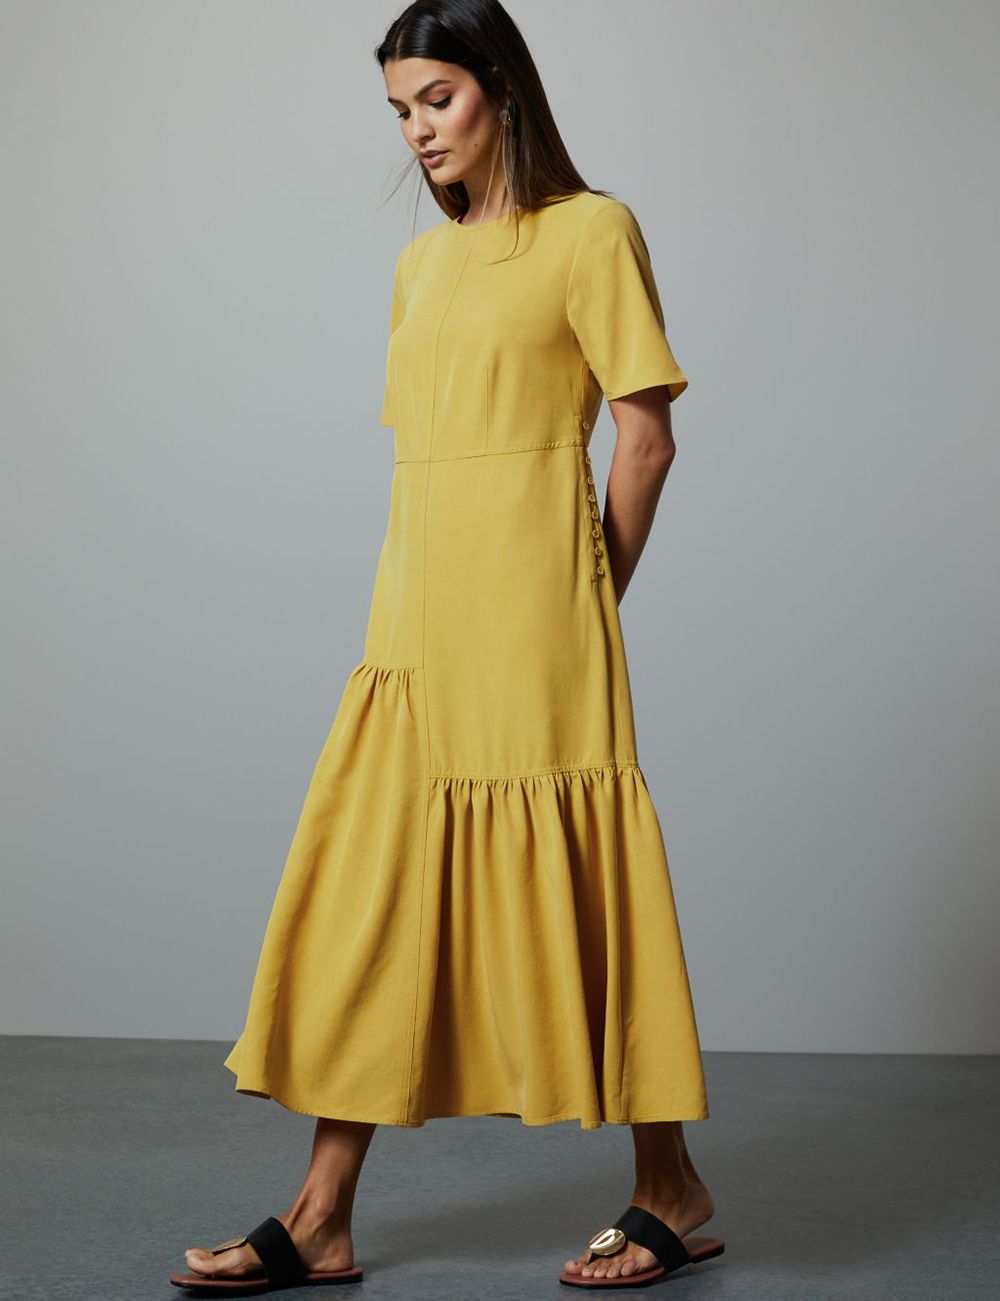 m and s yellow dress